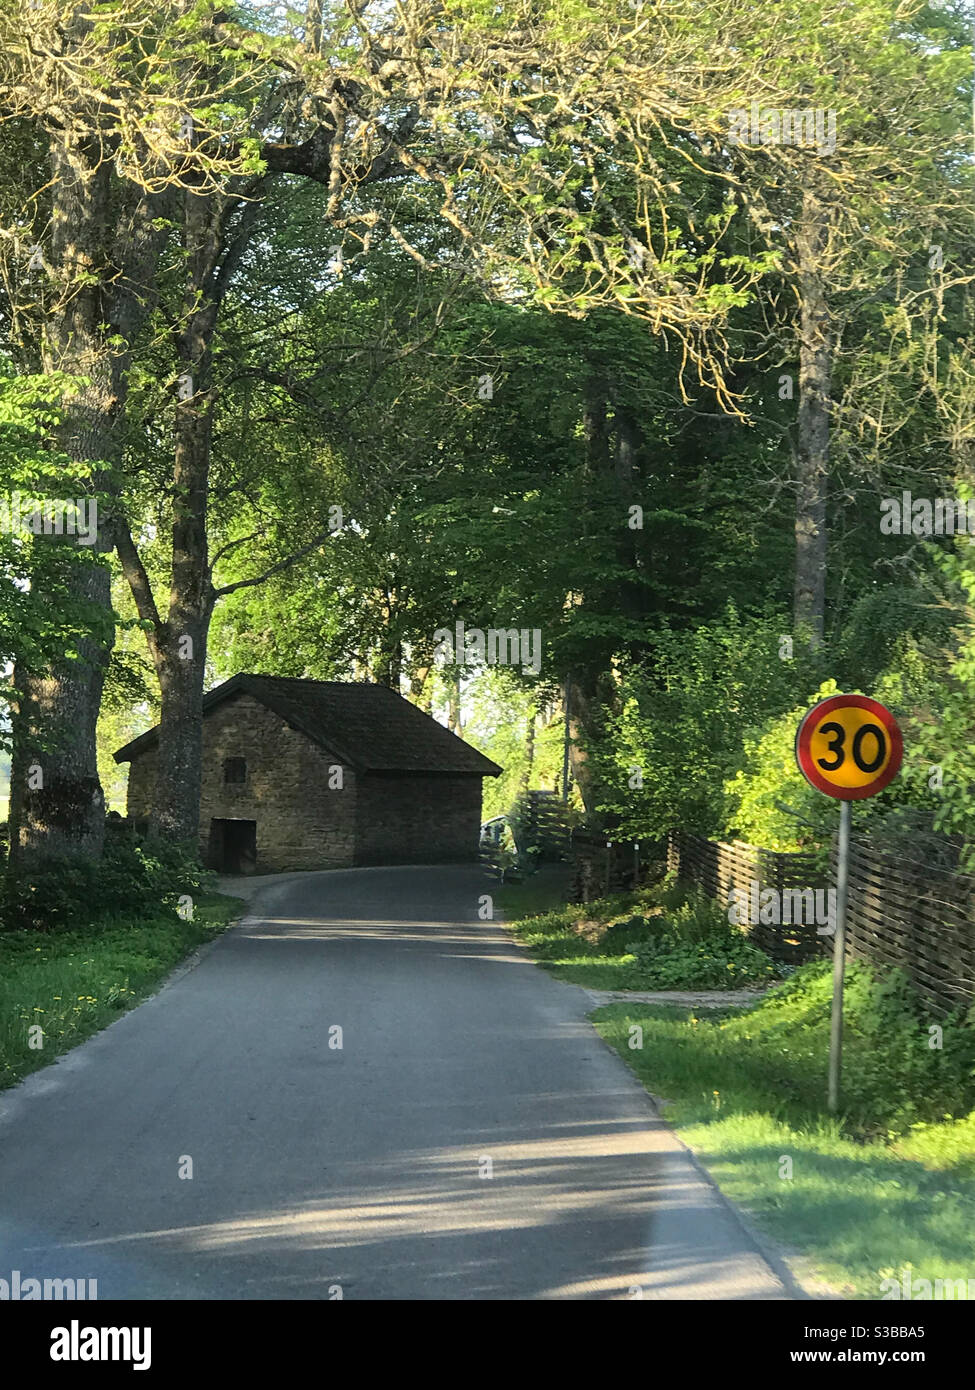 Summer road with ancient house Stock Photo